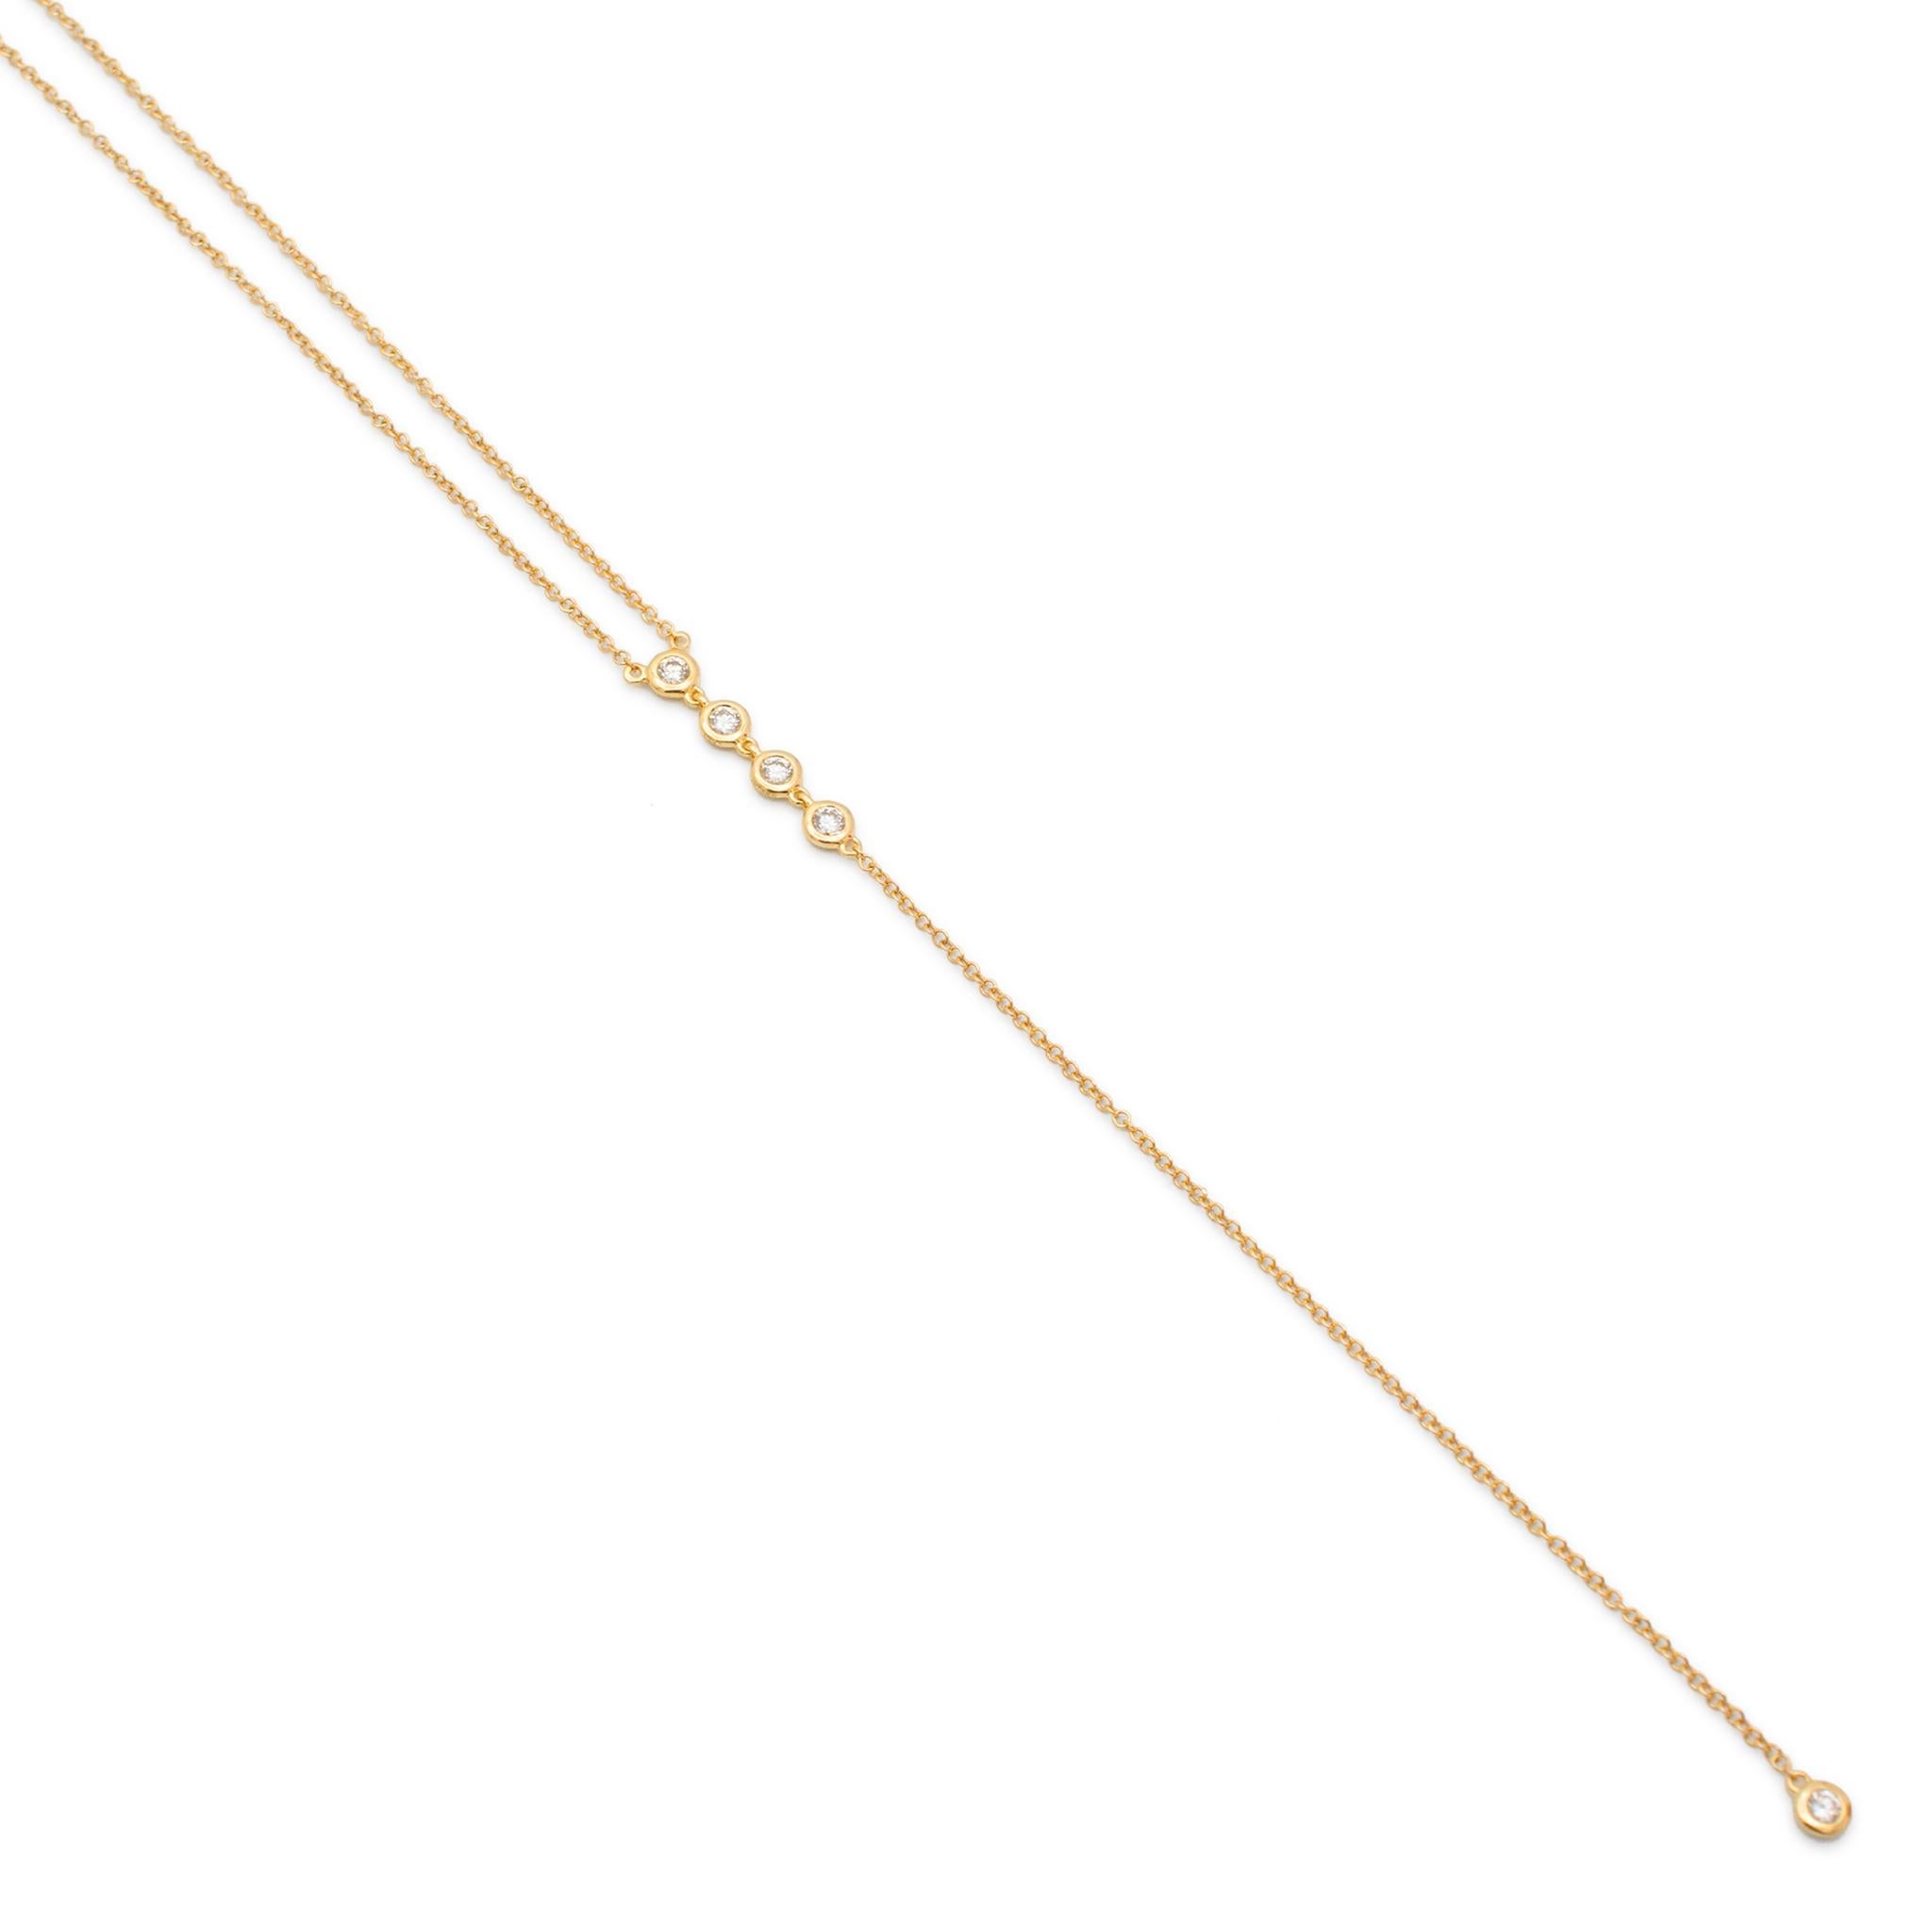 Women's Ladies 14K Yellow Gold Y Shaped Lariat Diamond Pendant Necklace For Sale